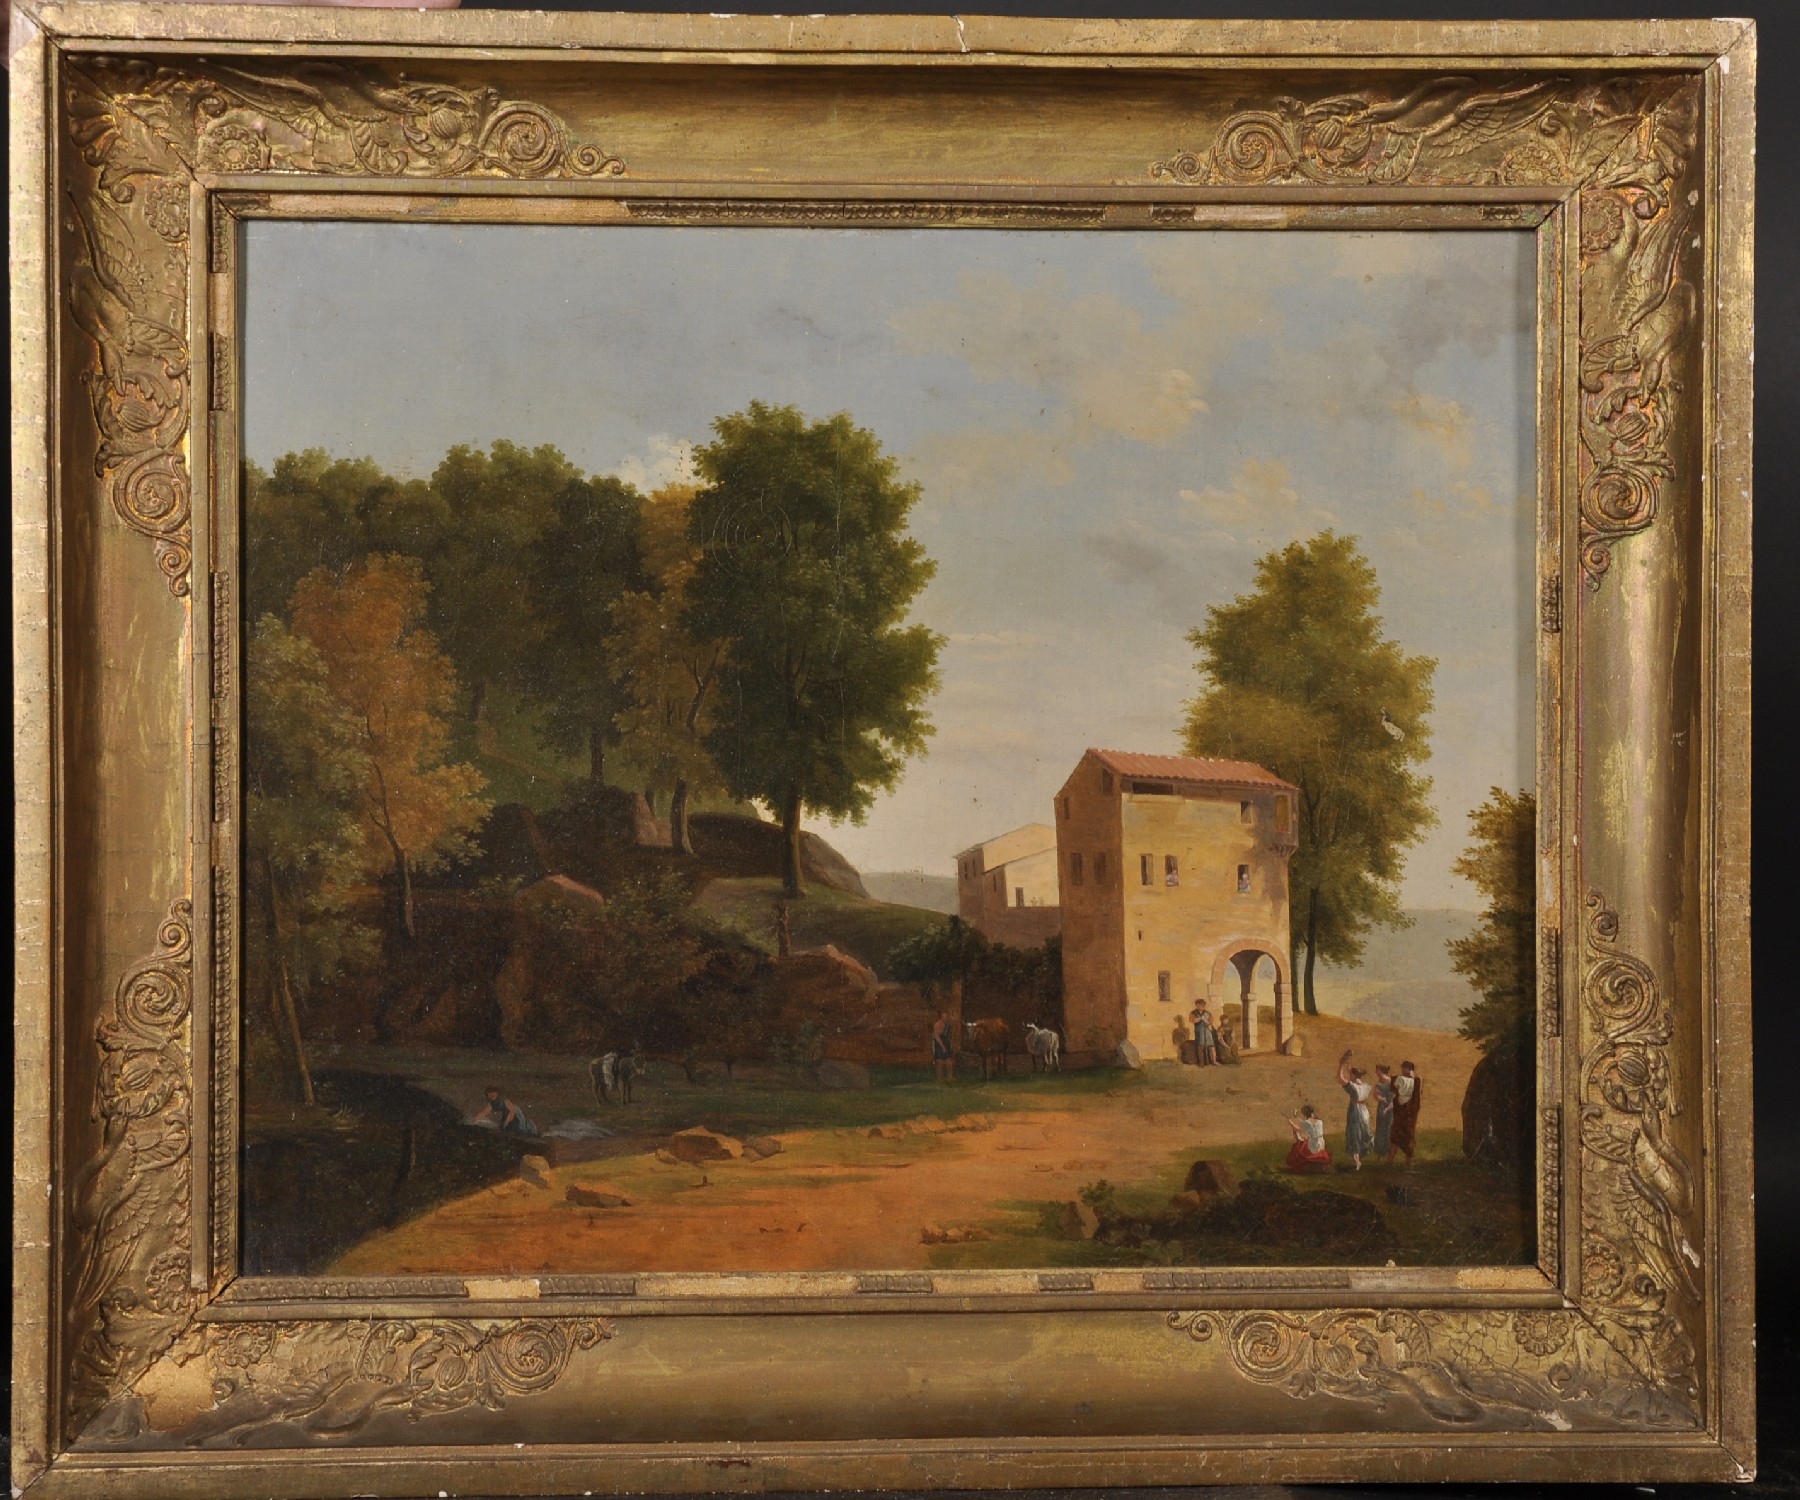 Early 19th Century French School. Figures Playing Musical Instruments in a Landscape, beside a - Image 2 of 4